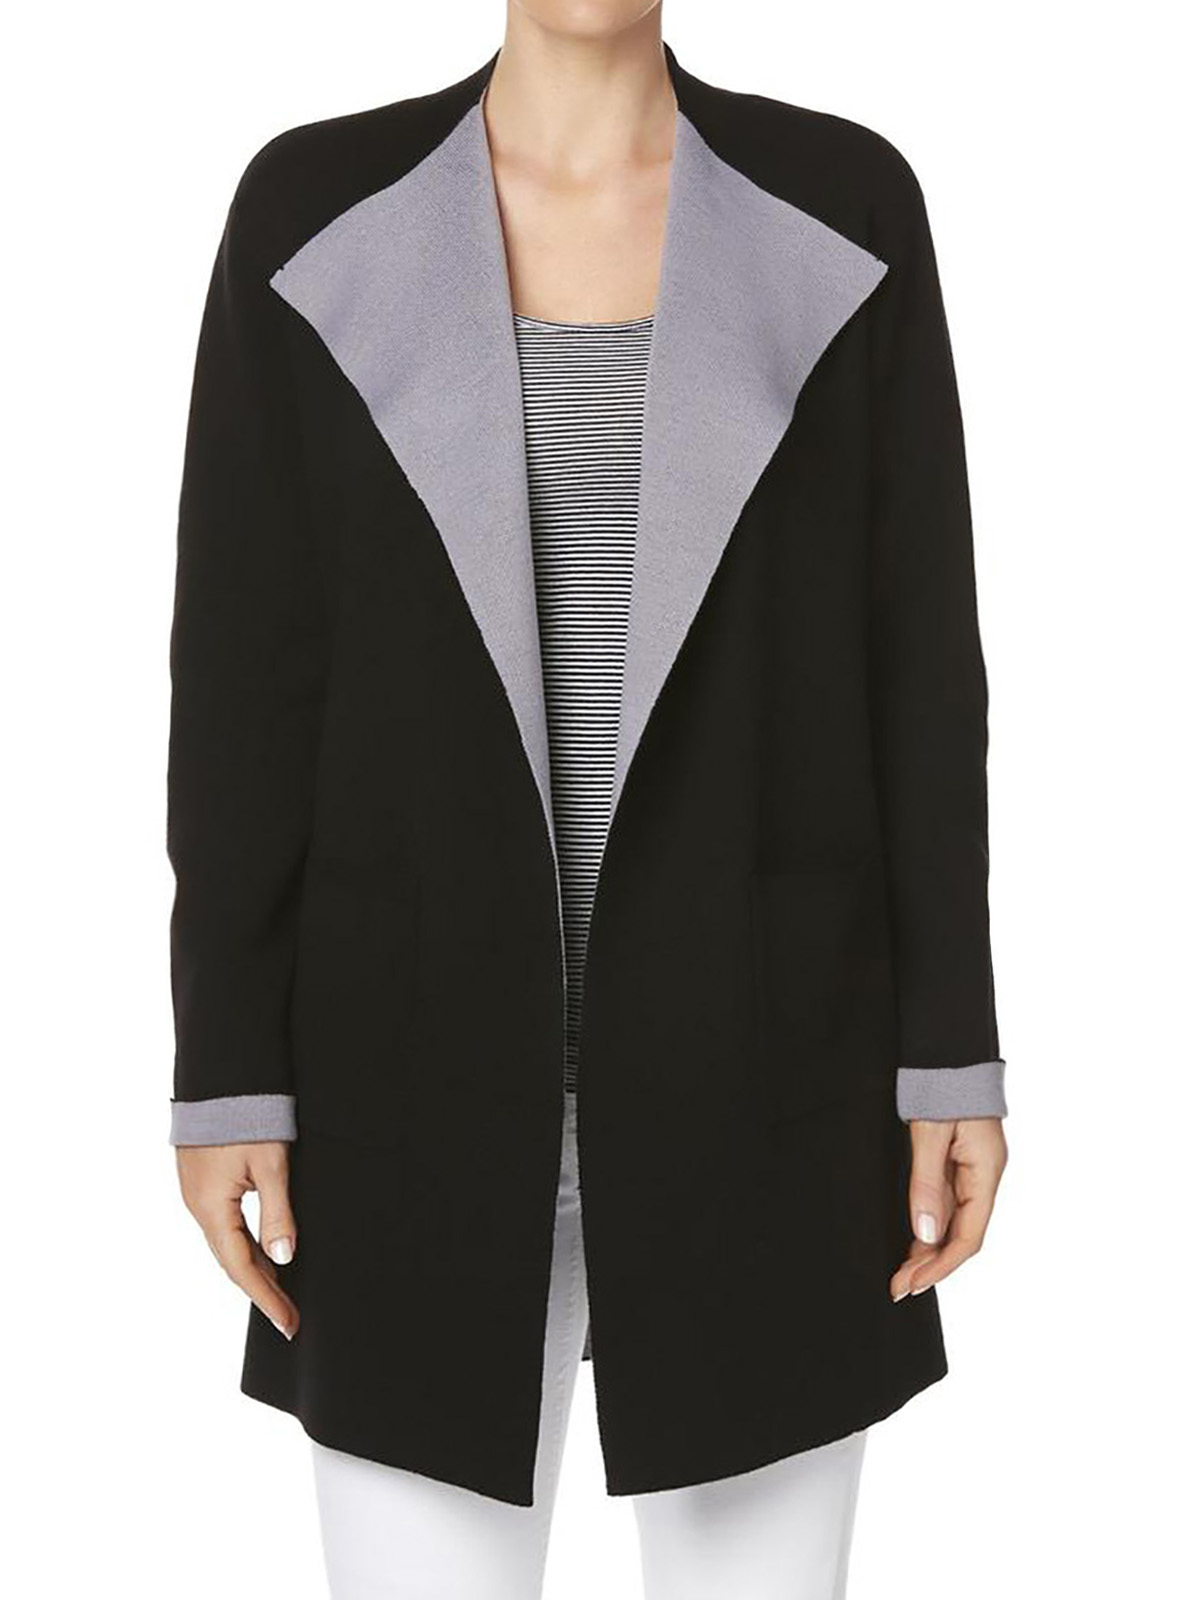 Jaclyn Smith - - Jaclyn Smith BLACK Open Front Cardigan - Size 6/8 to ...